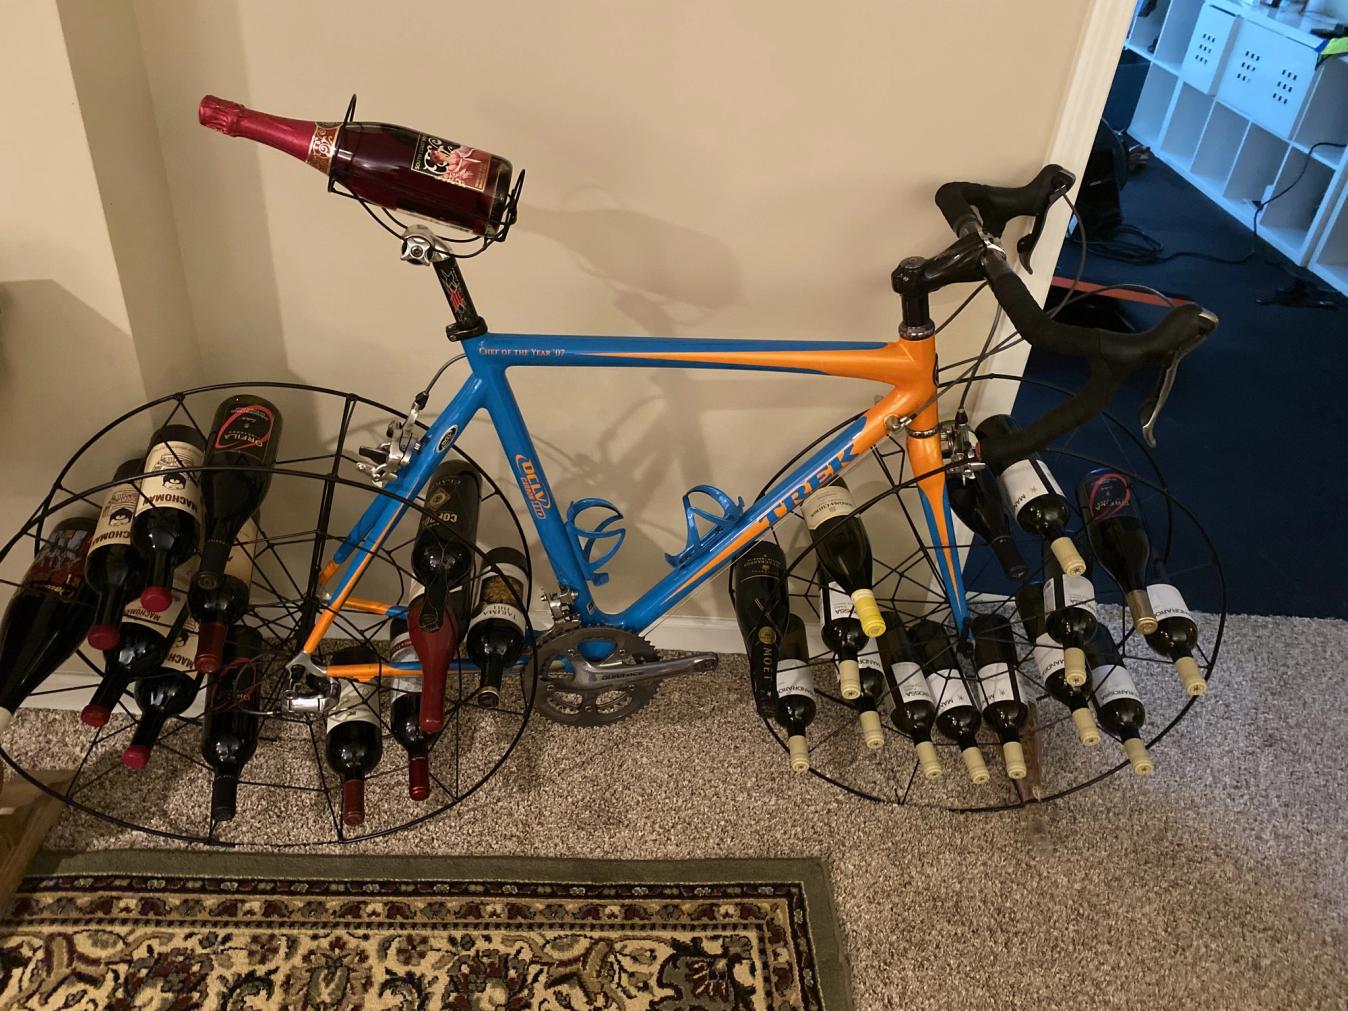 Trek bicycle turned into a wine rack with lots of wine bottle storage